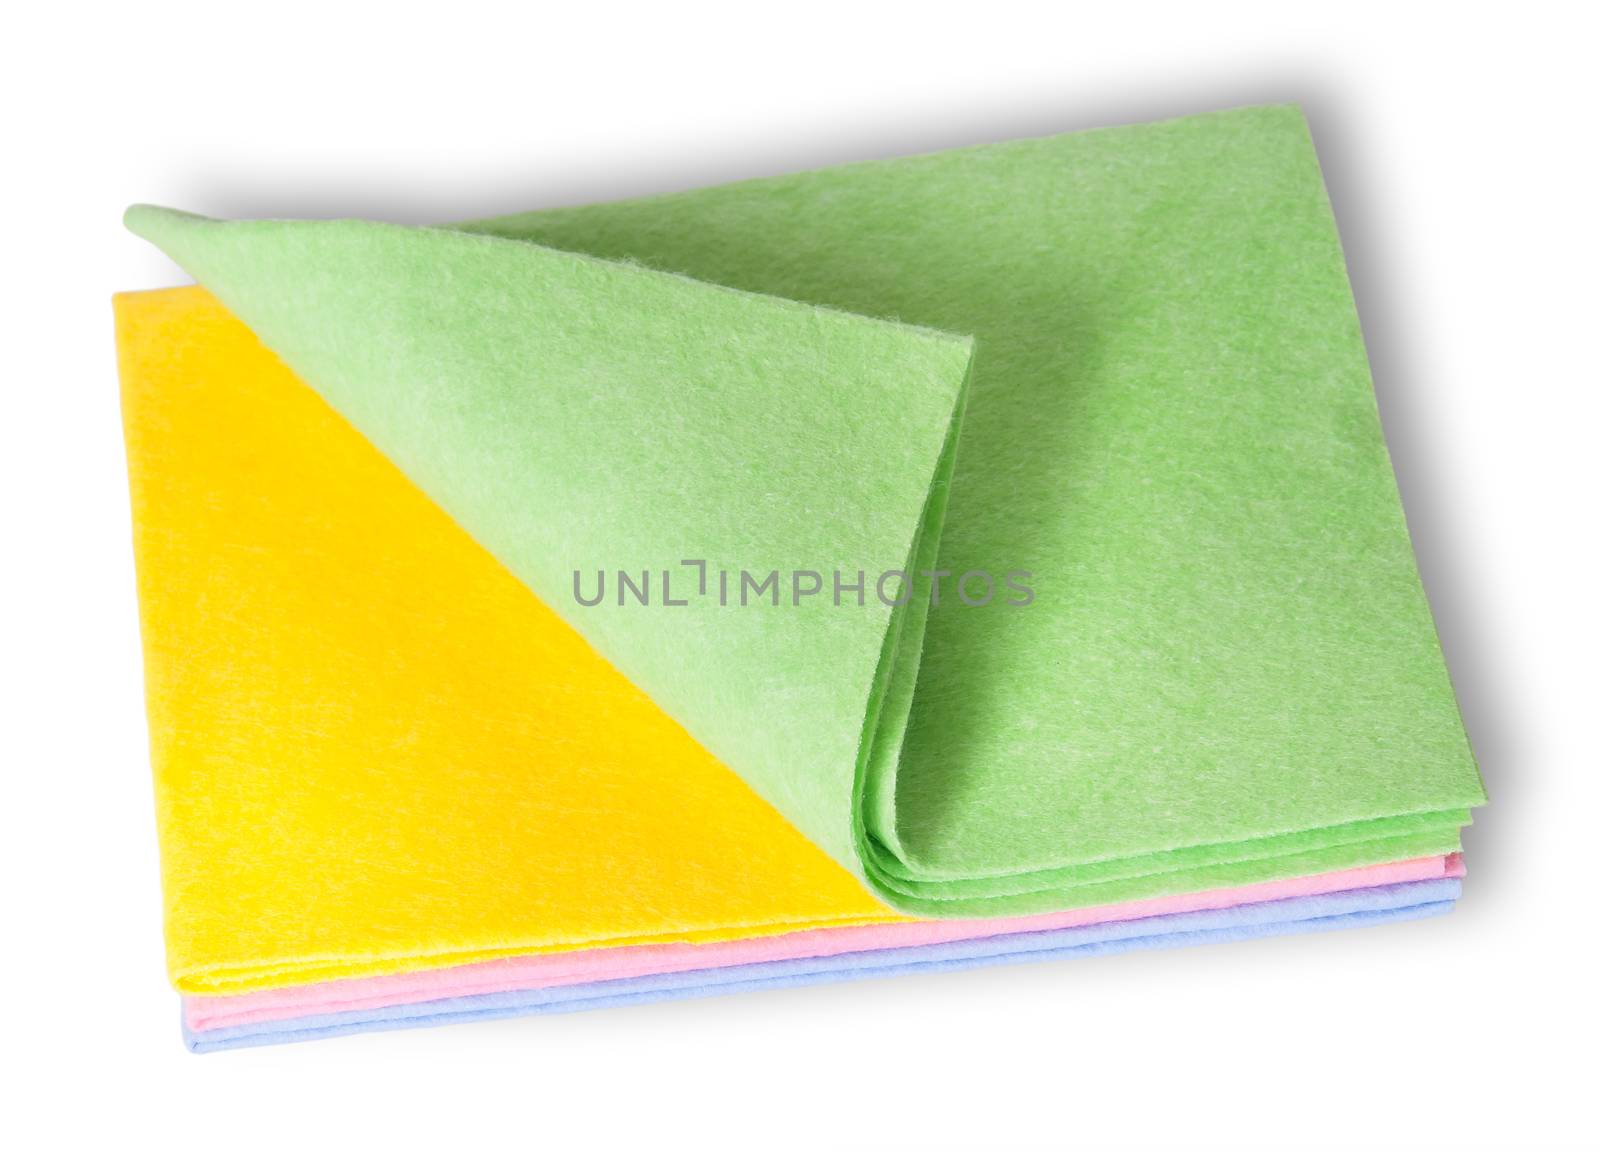 Multicolored cleaning cloths folded on top by Cipariss